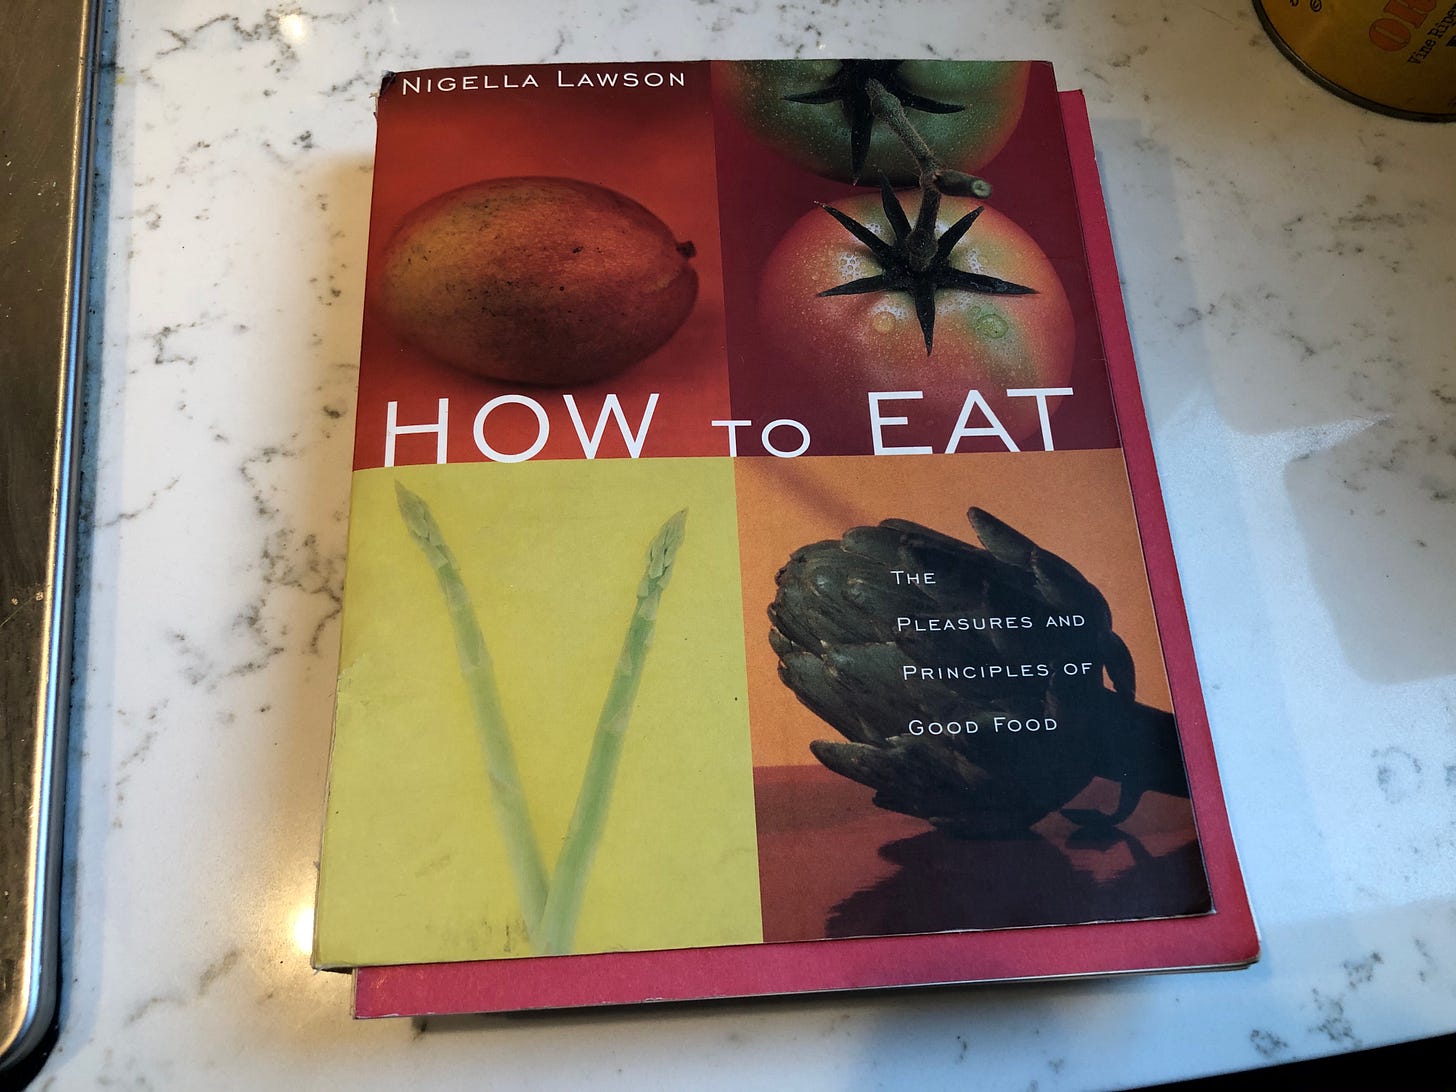 My copy of Nigella Lawson's "How to Eat"